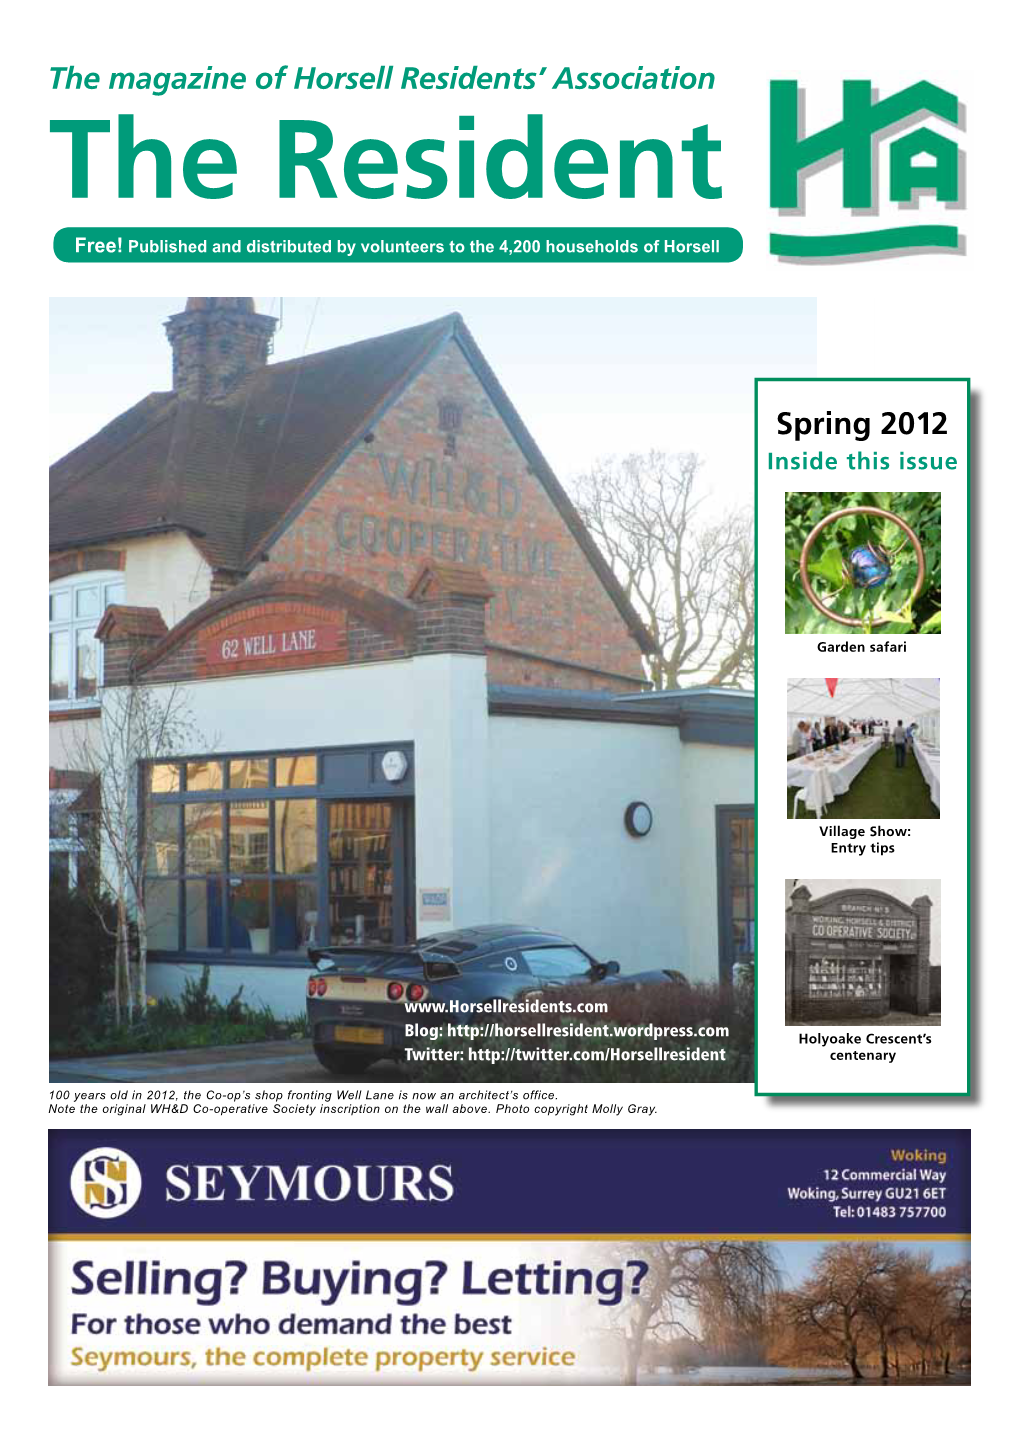 The Magazine of Horsell Residents' Association